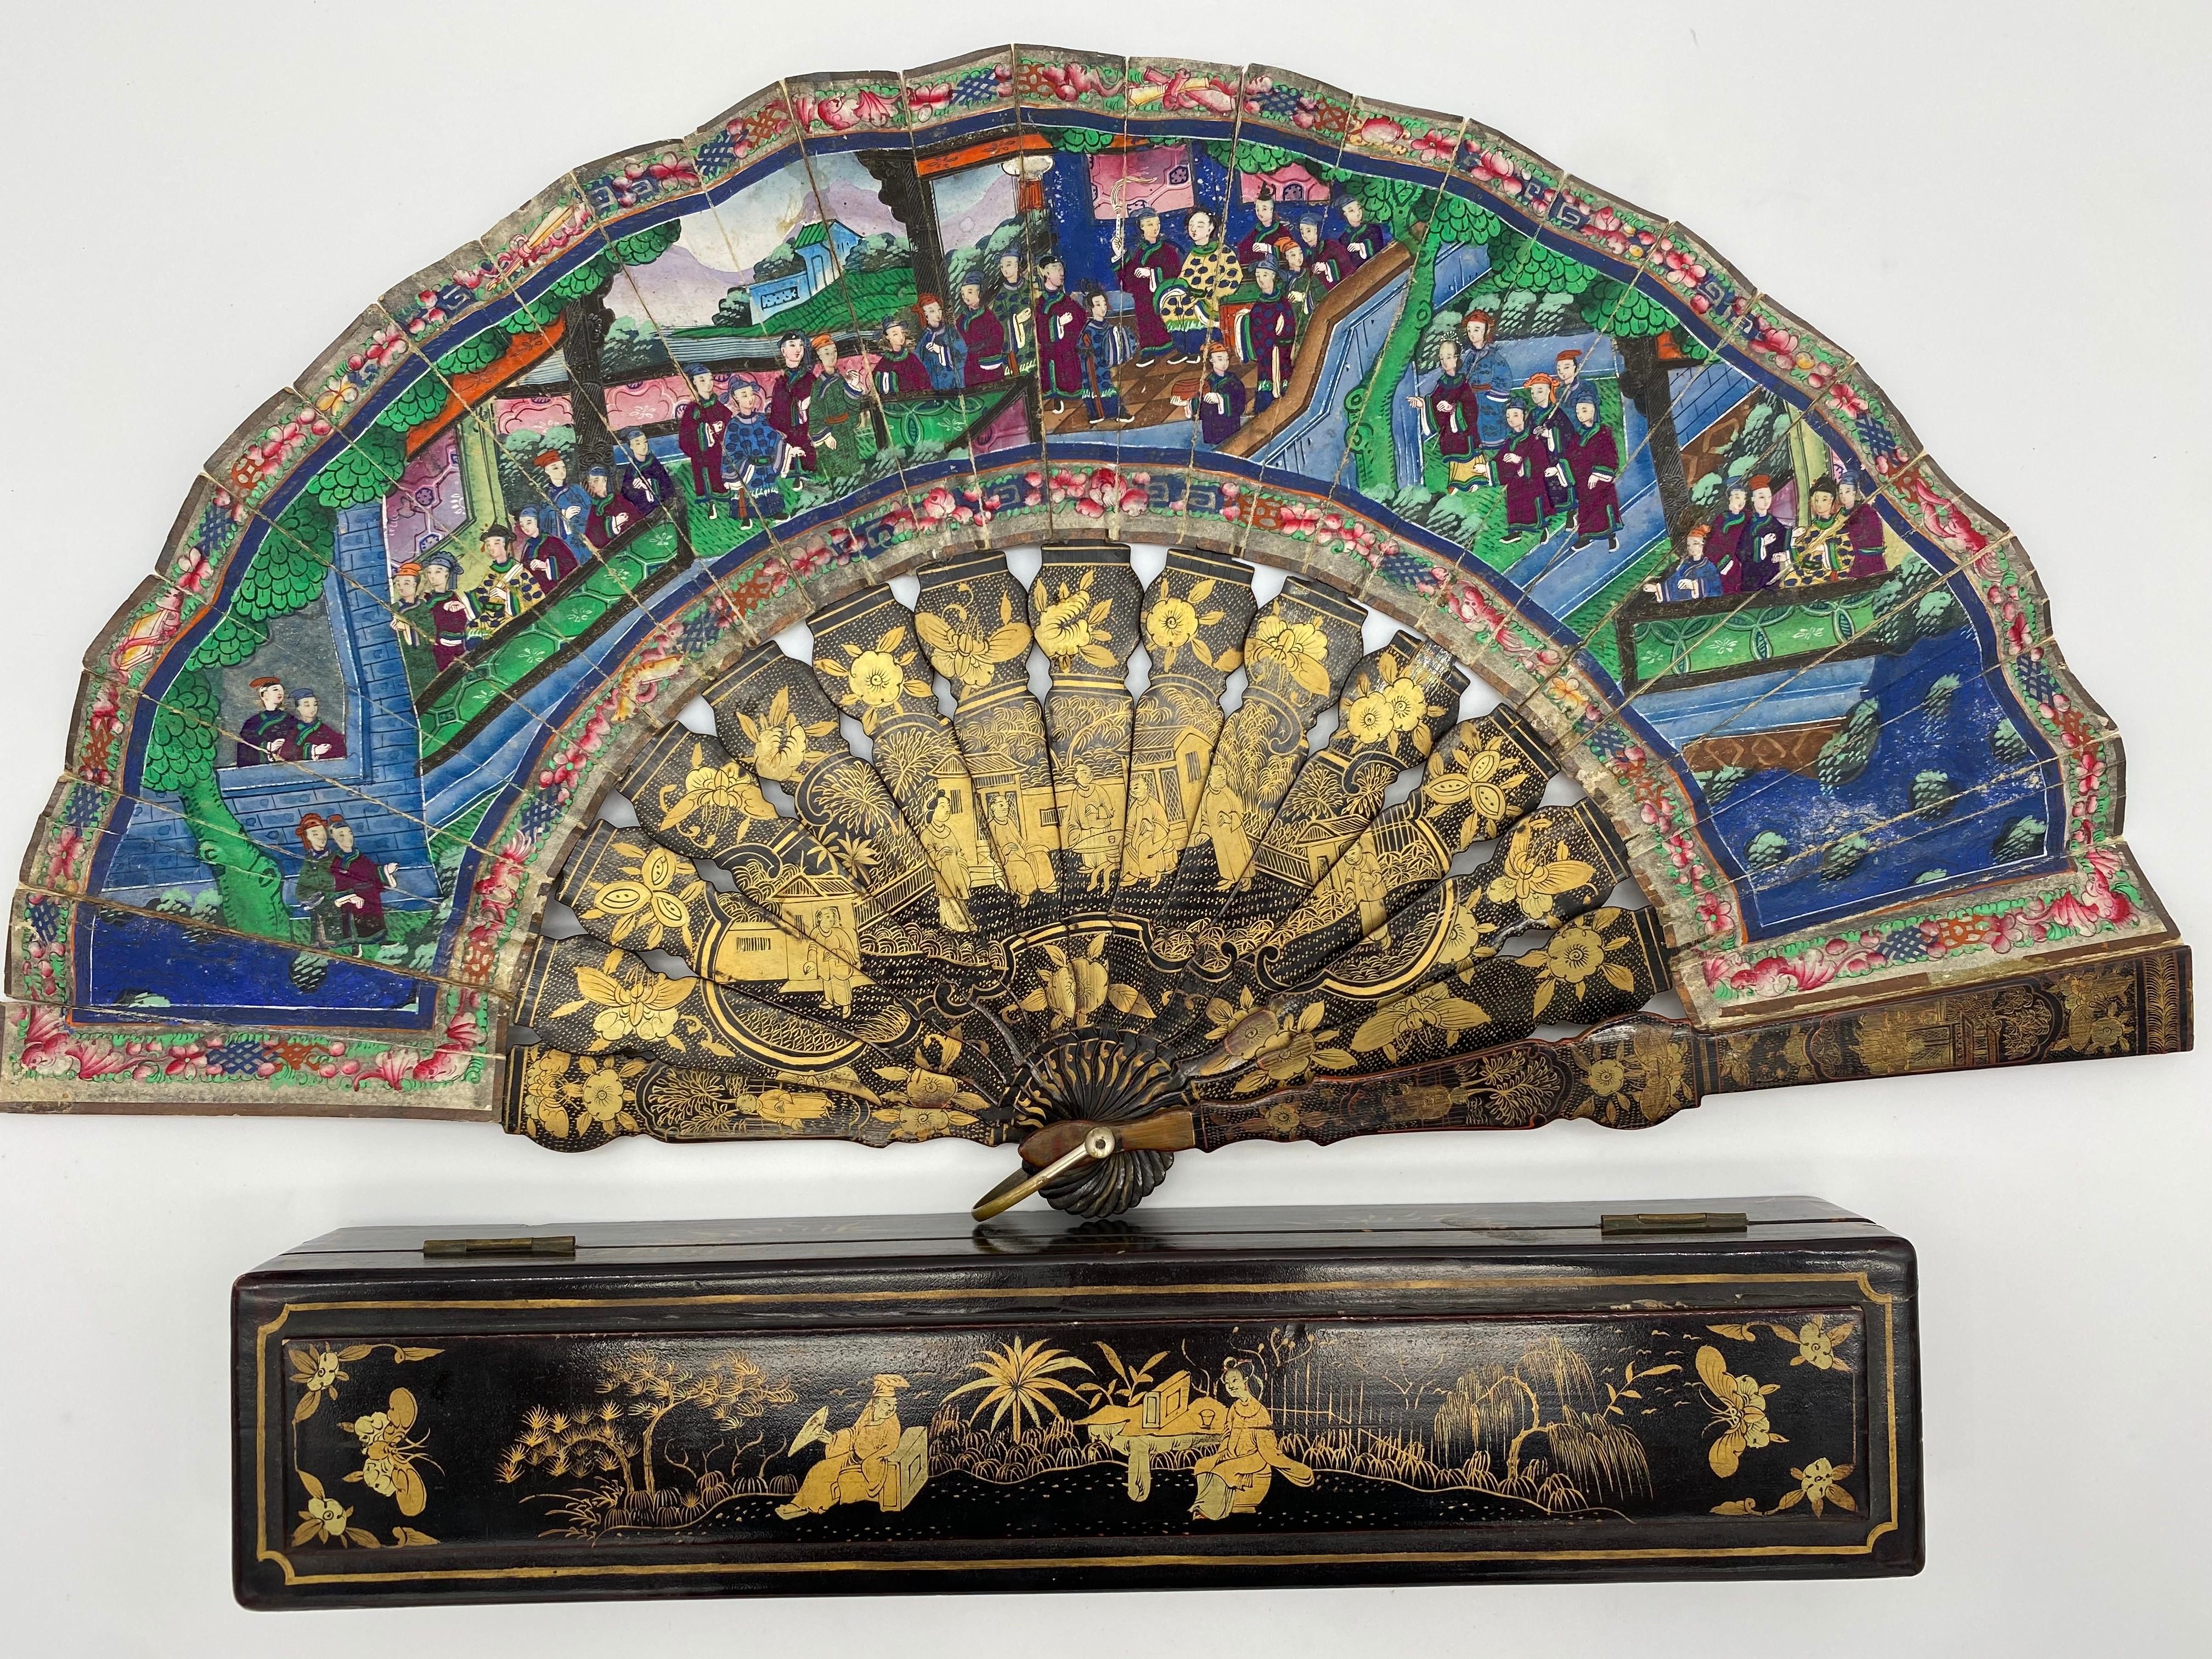 19th Century Chinese Gilt Lacquer Fan with Landscape 100 Faces 4